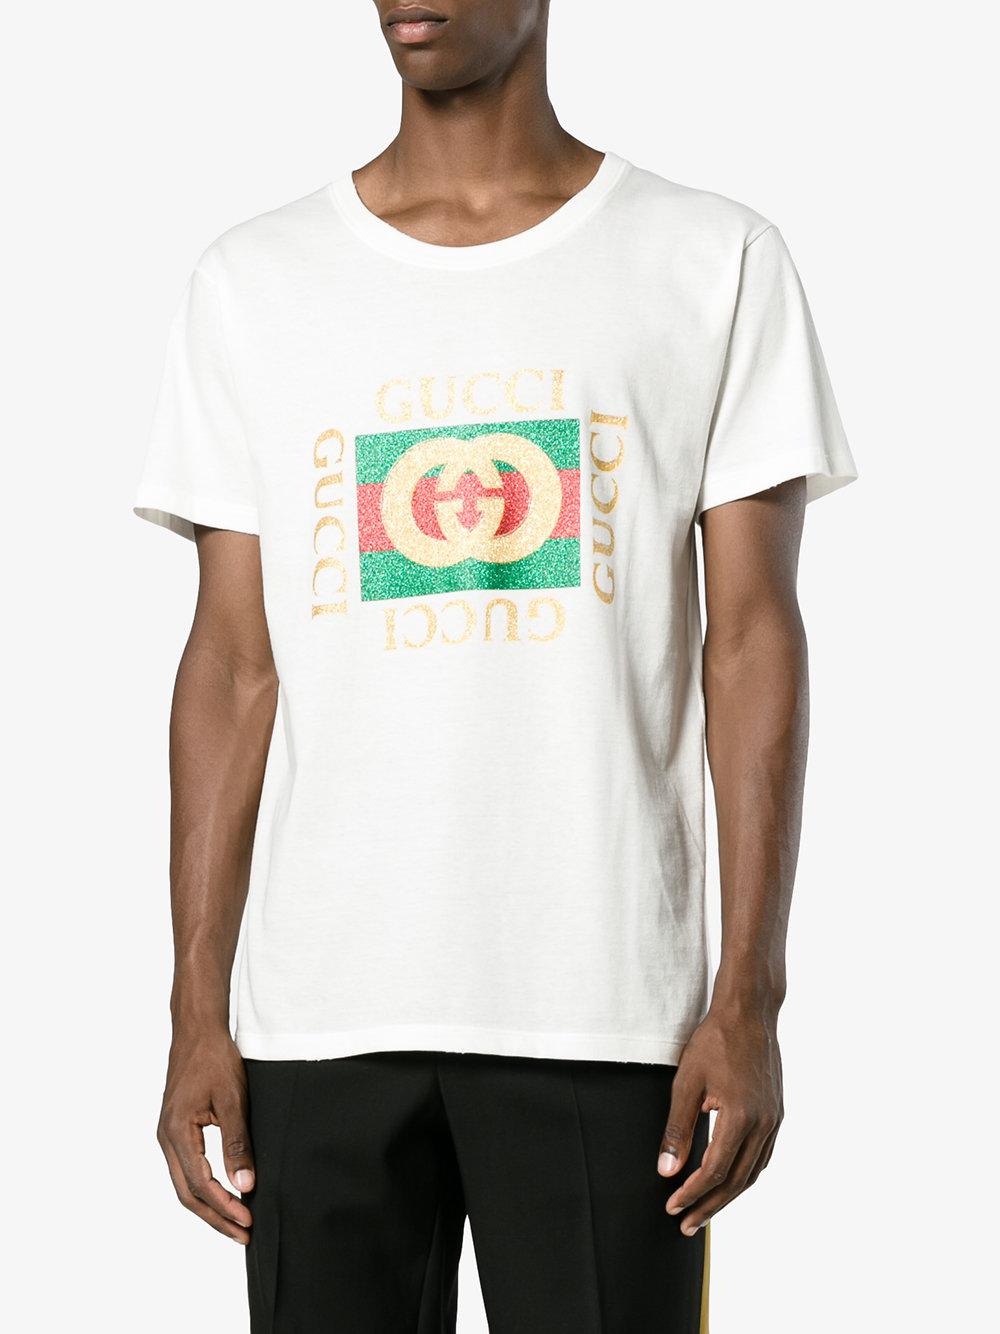 Gucci Logo Print T-shirt in White for Men - Lyst